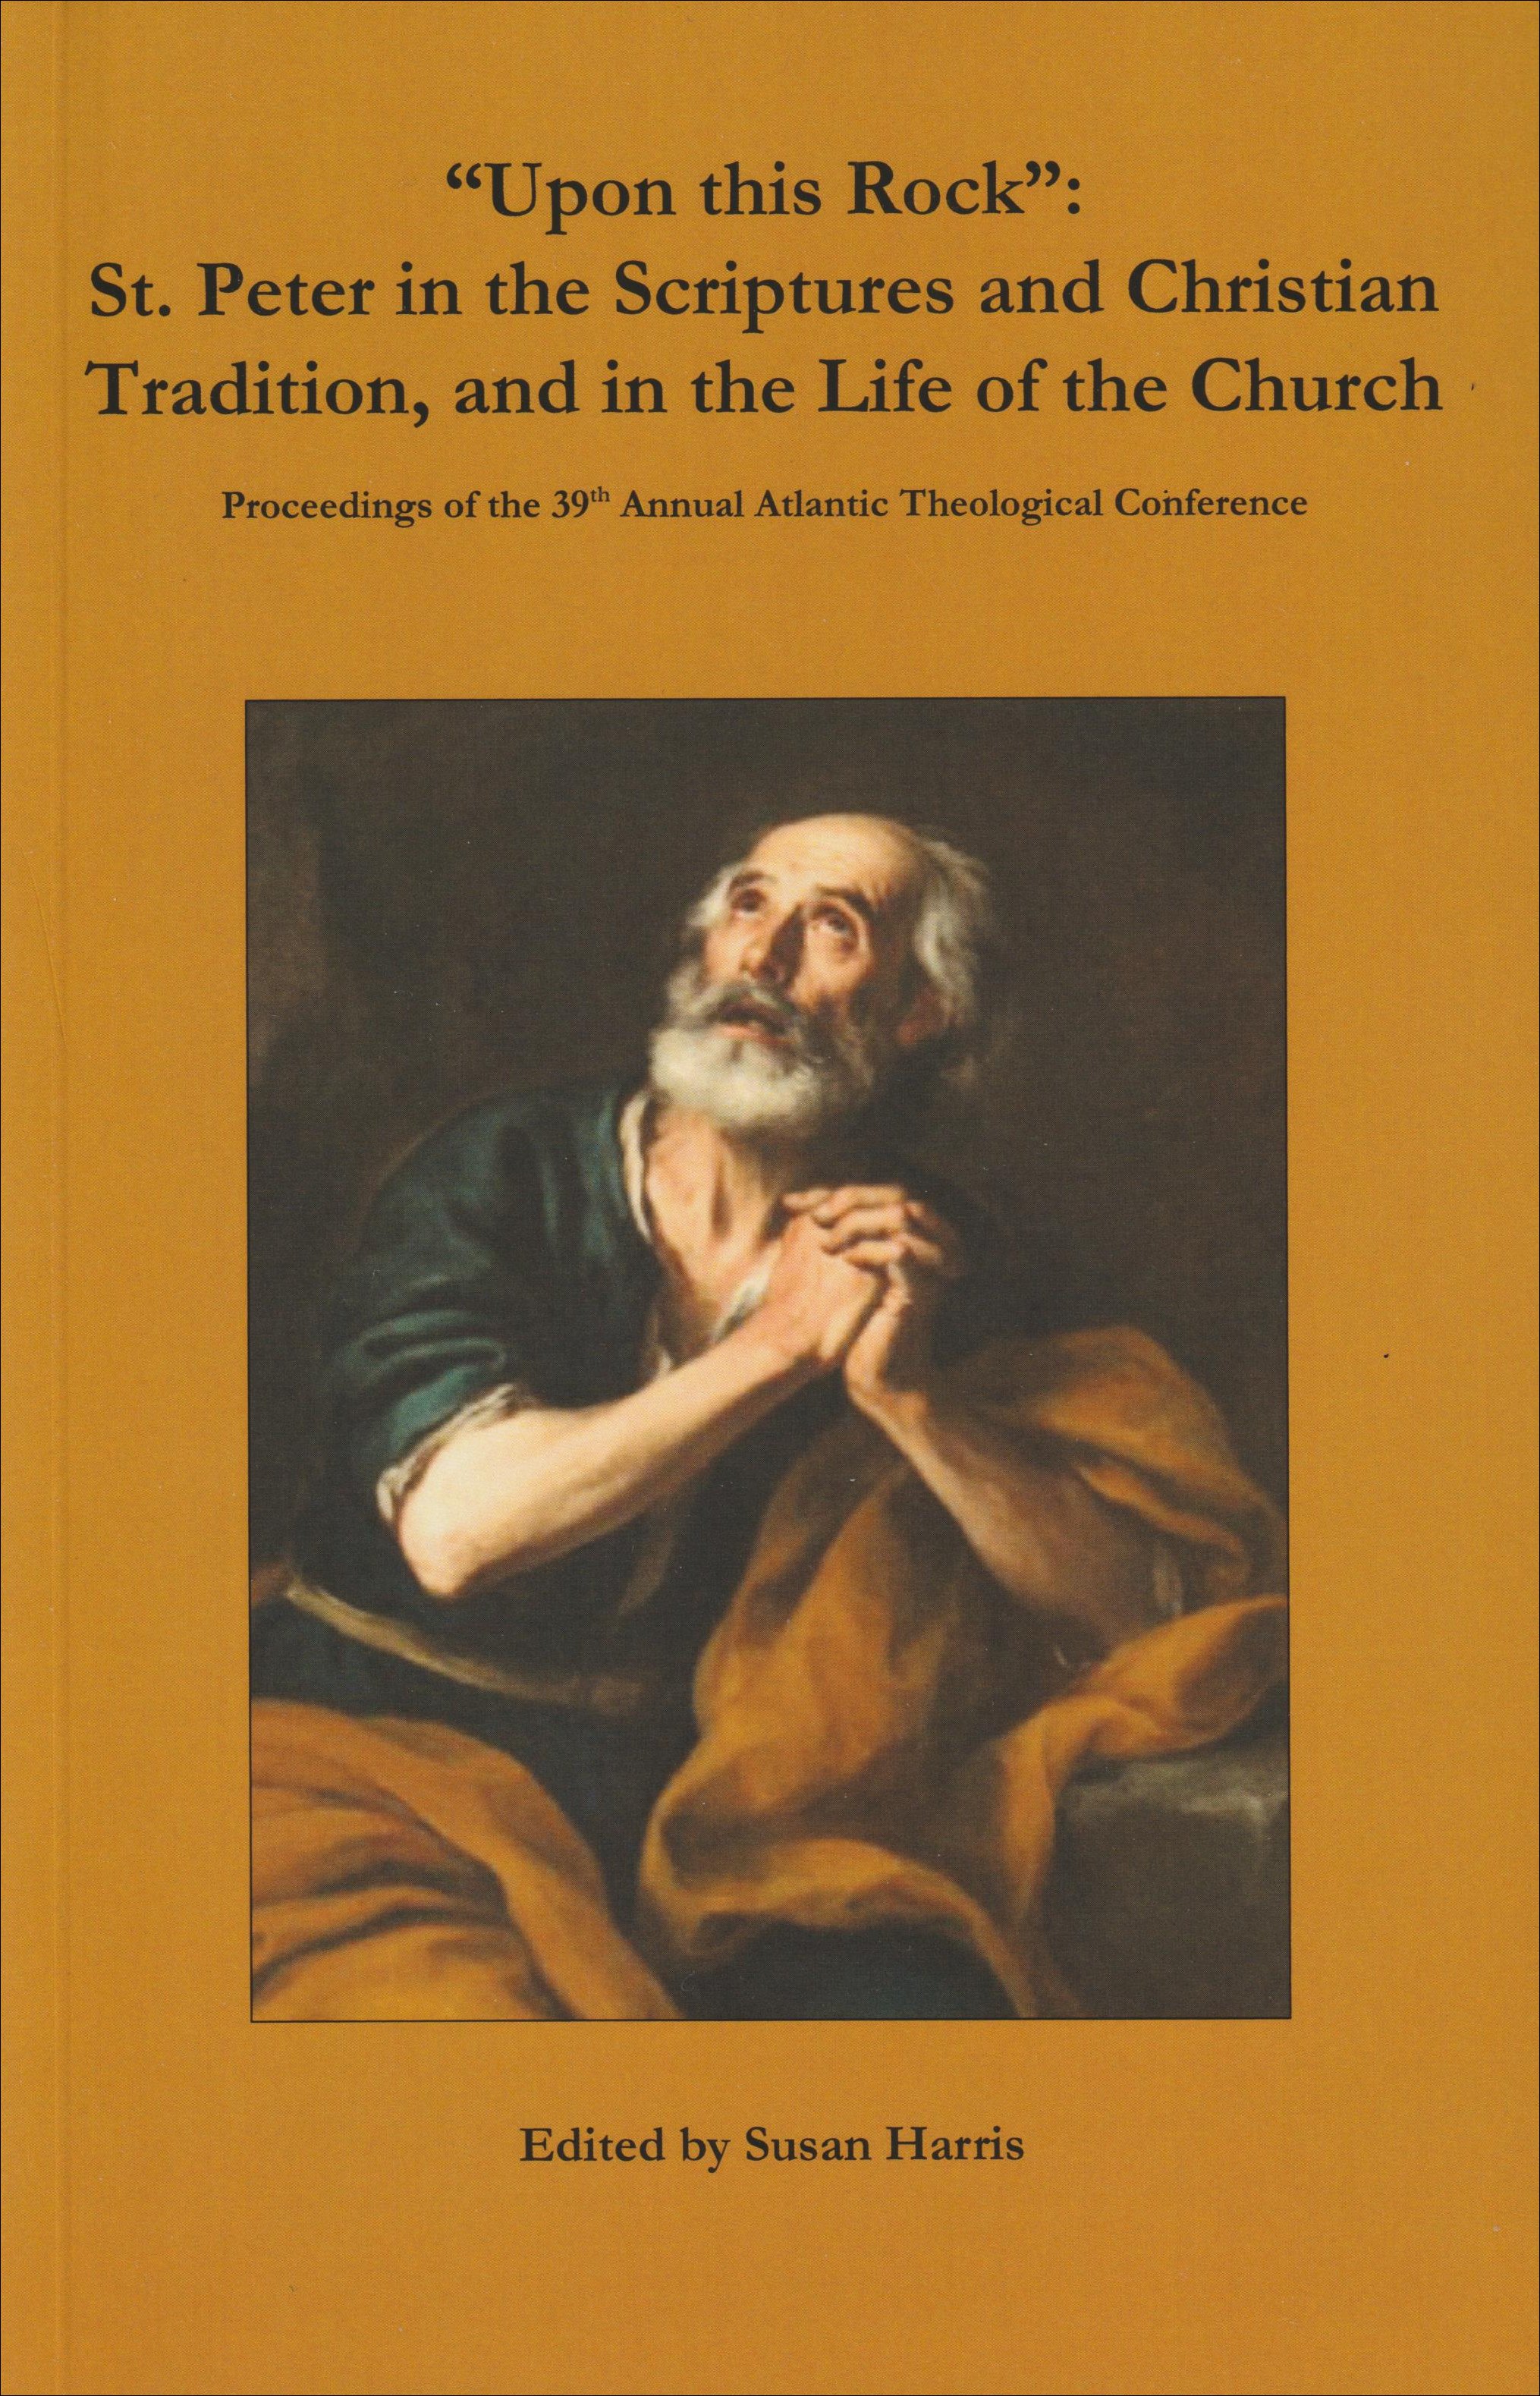 Book Cover, 2019 Conference Book